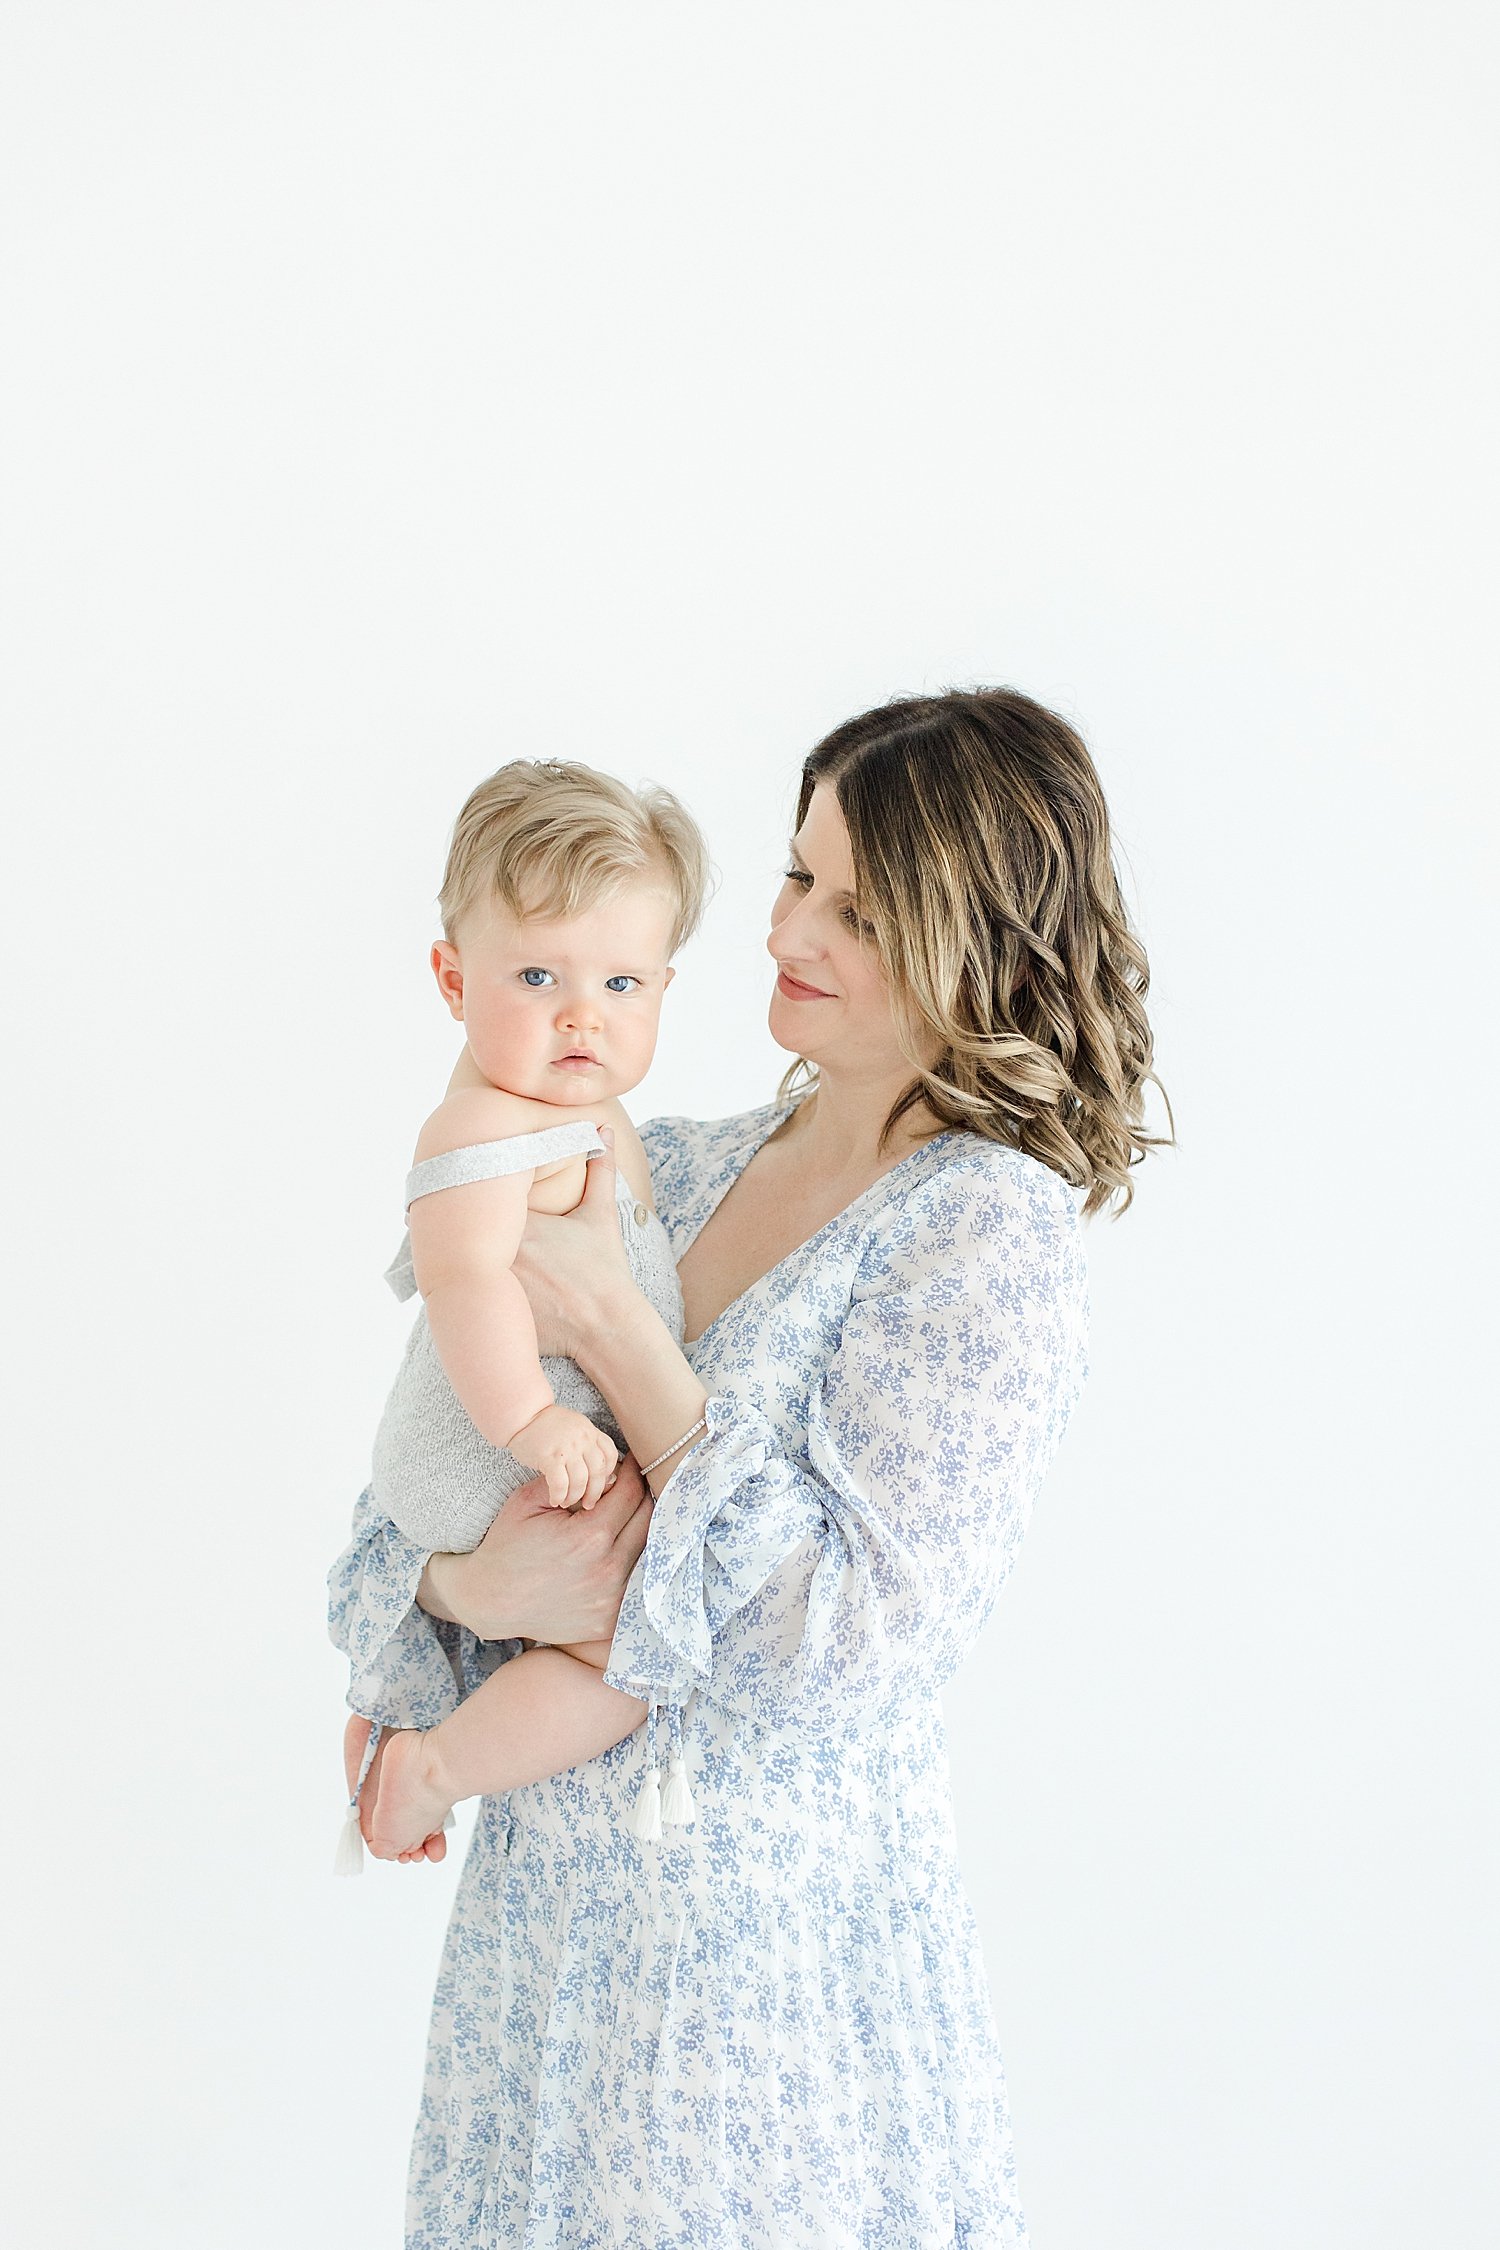 Mom snuggling her baby boy | Kristin Wood Photography